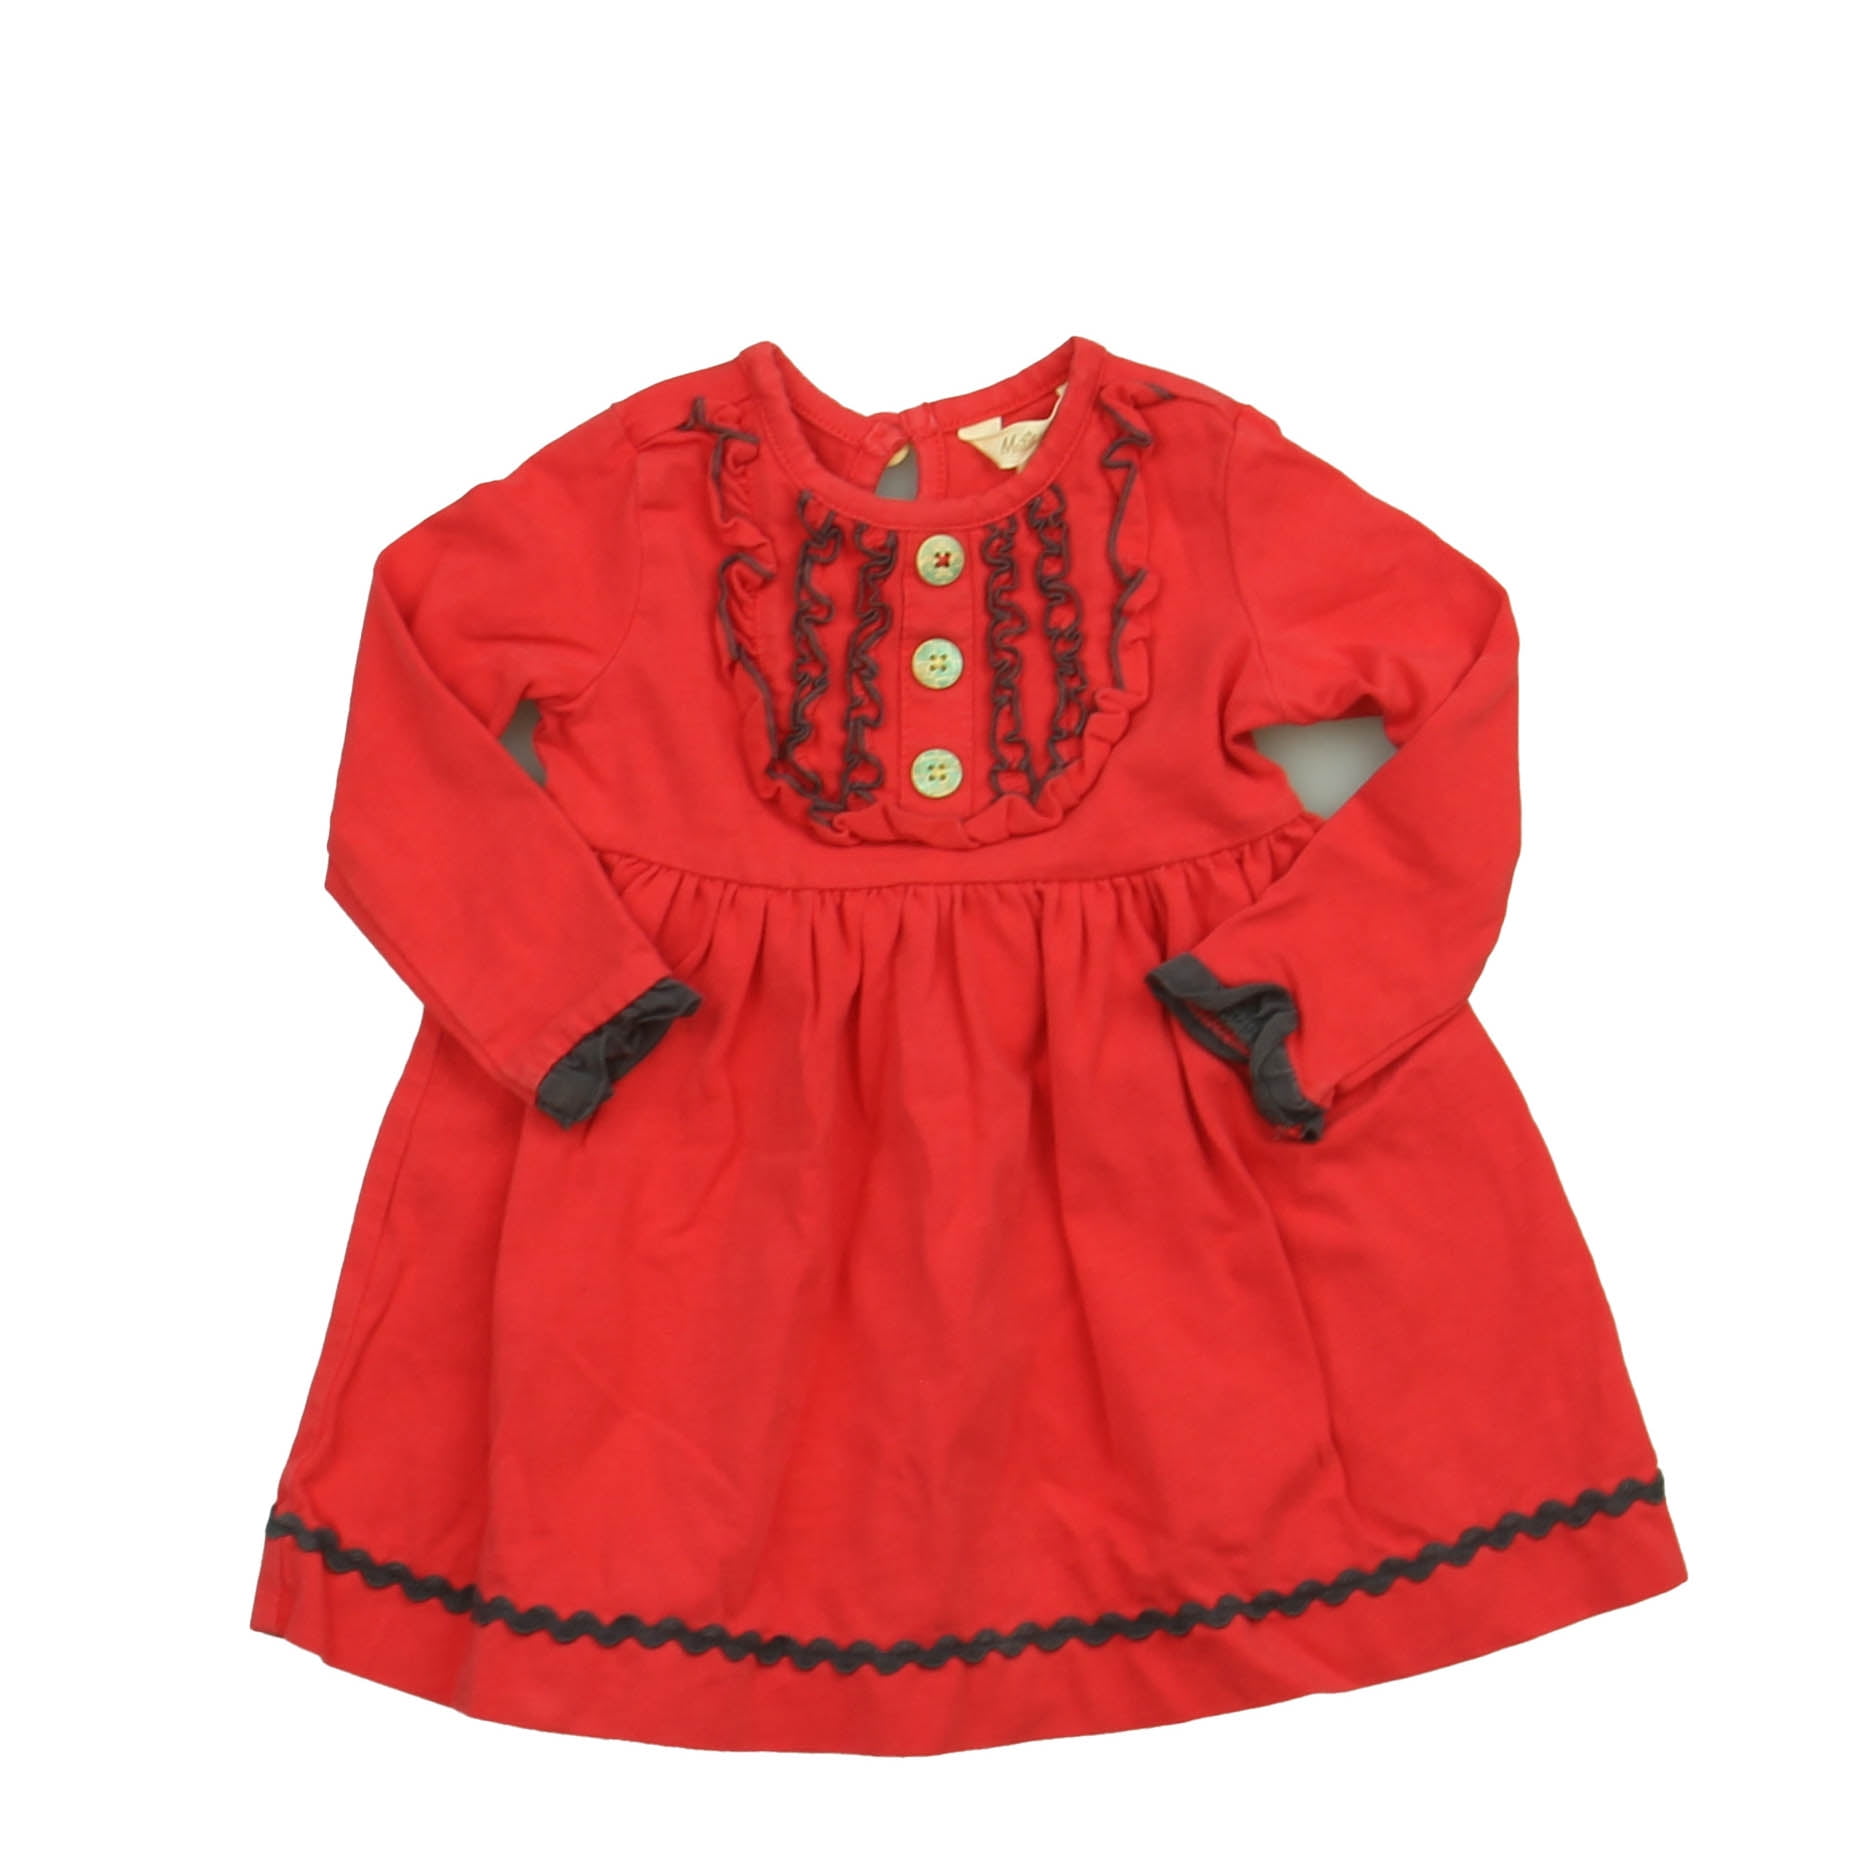 Pre-owned Matilda Jane Girls Red Dress size: 6-12 Months 